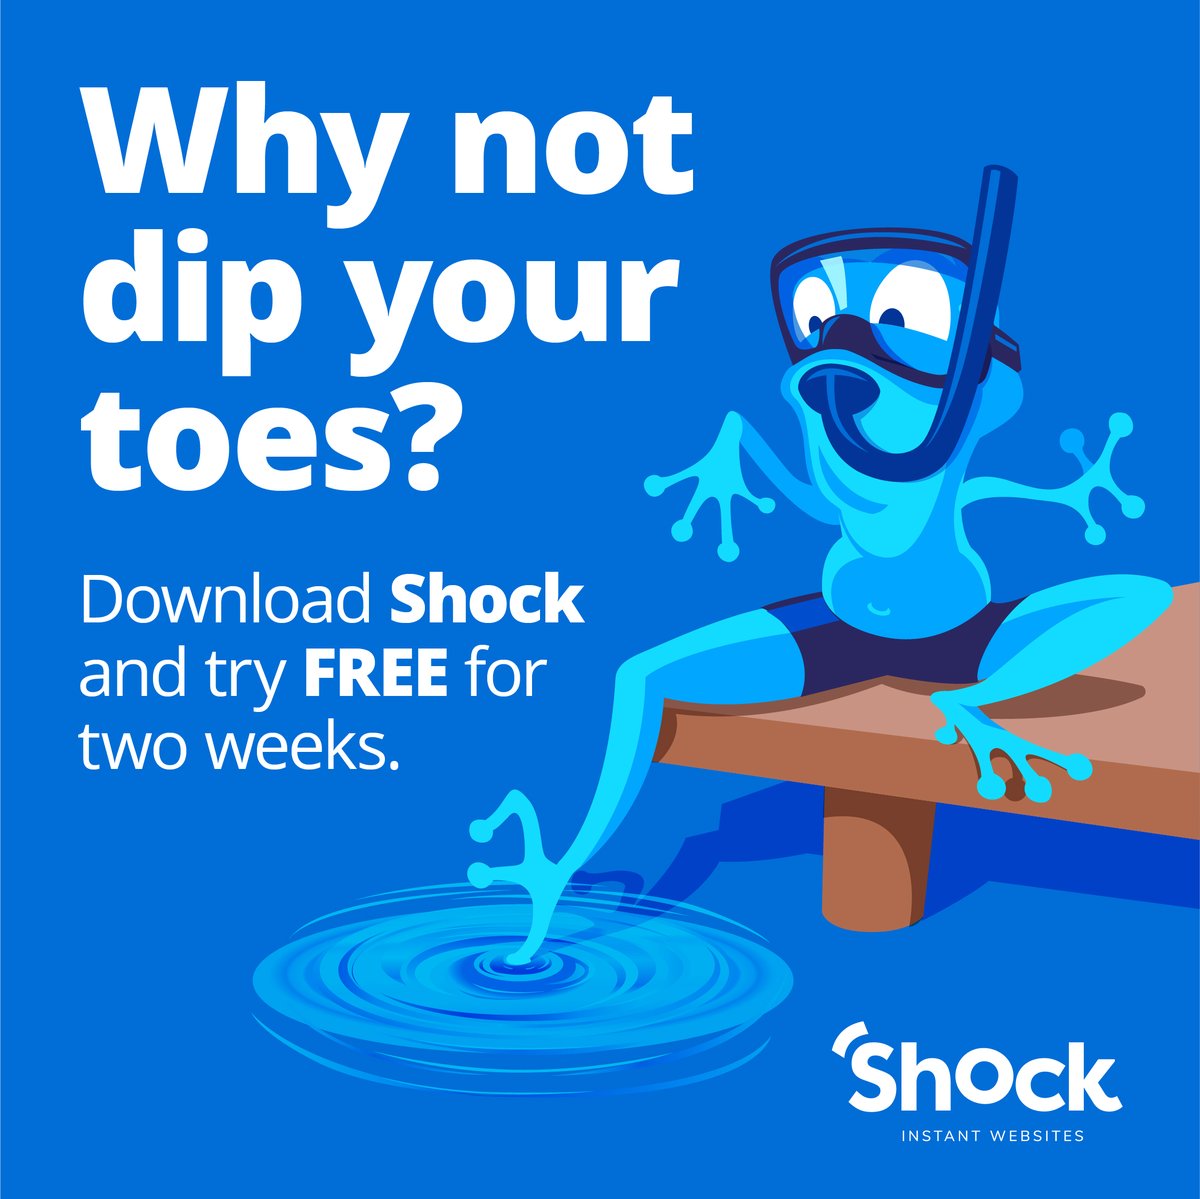 We know you'll love Shock which is why we're giving you a no obligation try. No need to provide your credit card details, in fact you can continue to play around offline after your two weeks are up! shock.n8.nz #MakeTheLeap #websitedesign  #freetrial #webbuilder